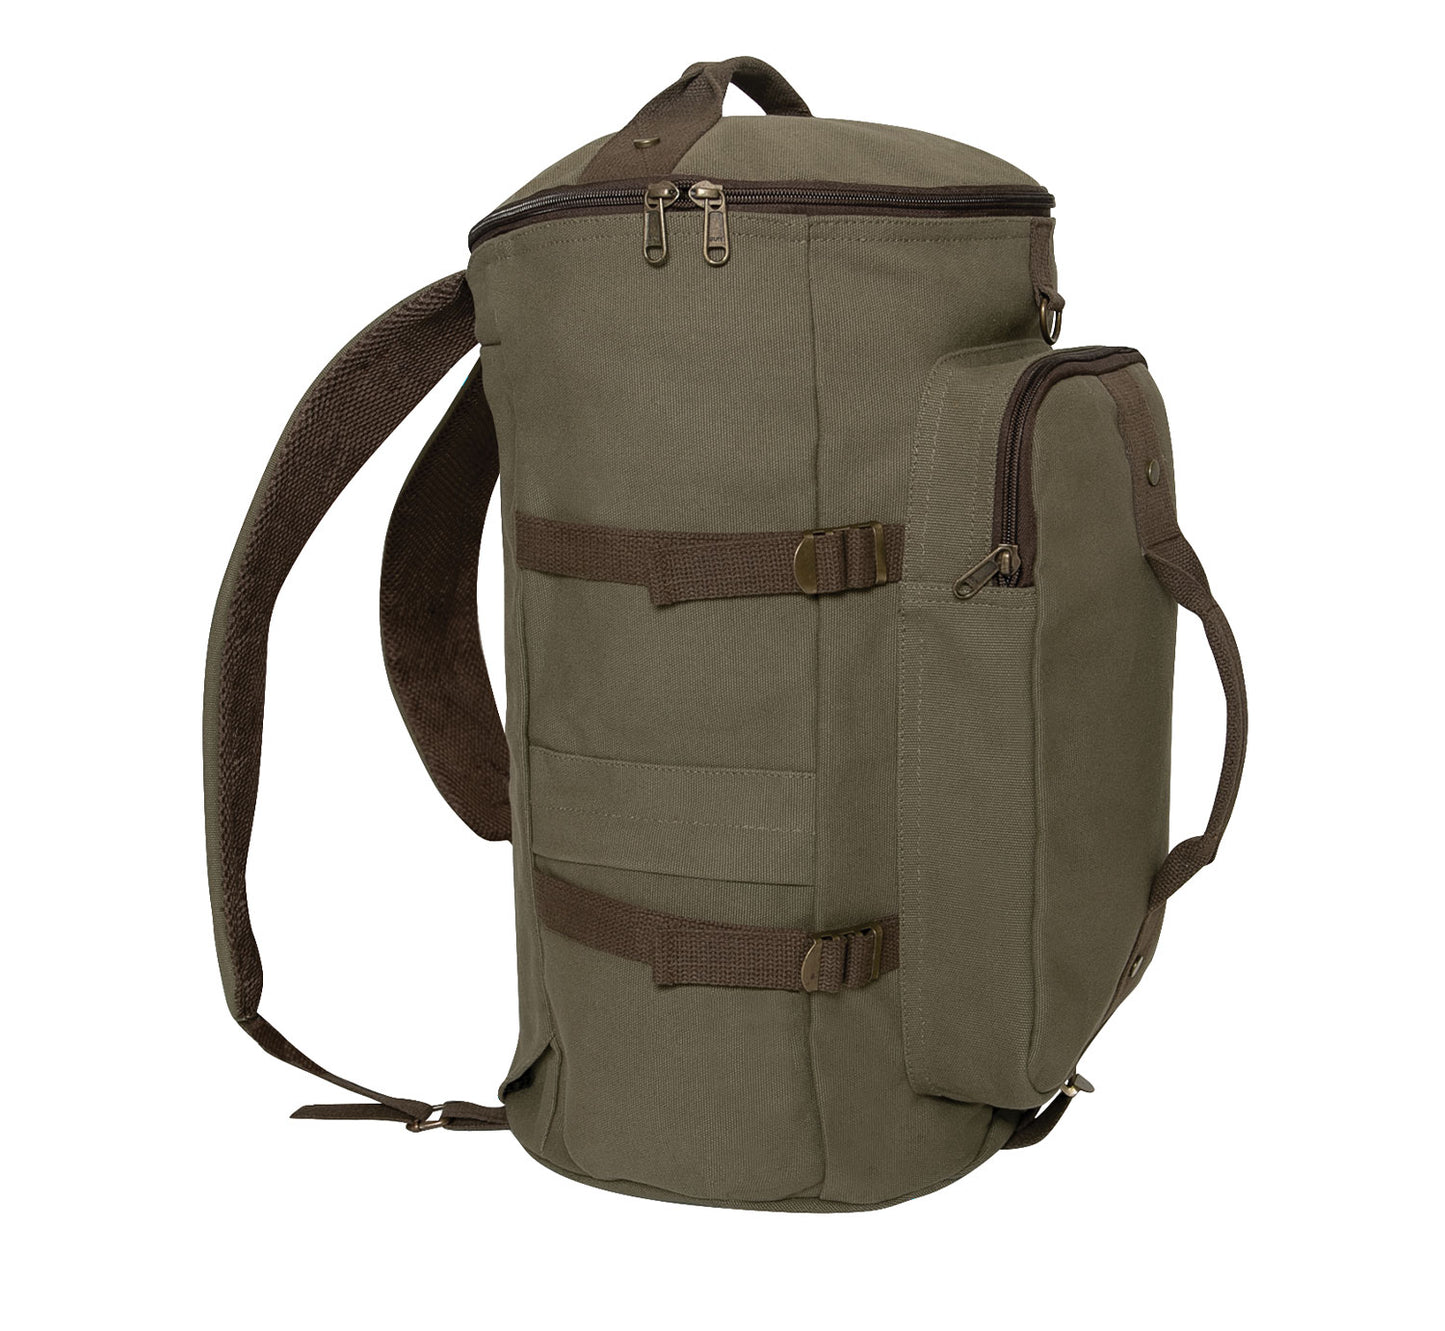 Milspec Convertible Canvas Duffle / Backpack - 19 Inches Backpacks MilTac Tactical Military Outdoor Gear Australia